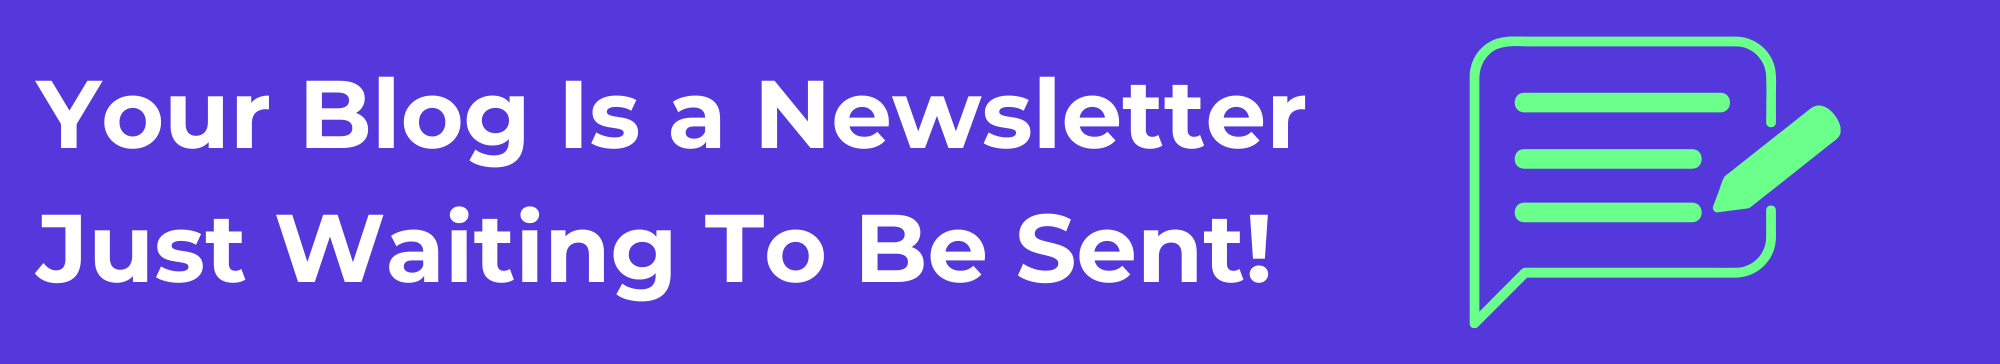 Email Marketing Strategy Utilizing Your Blogs as Newsletters